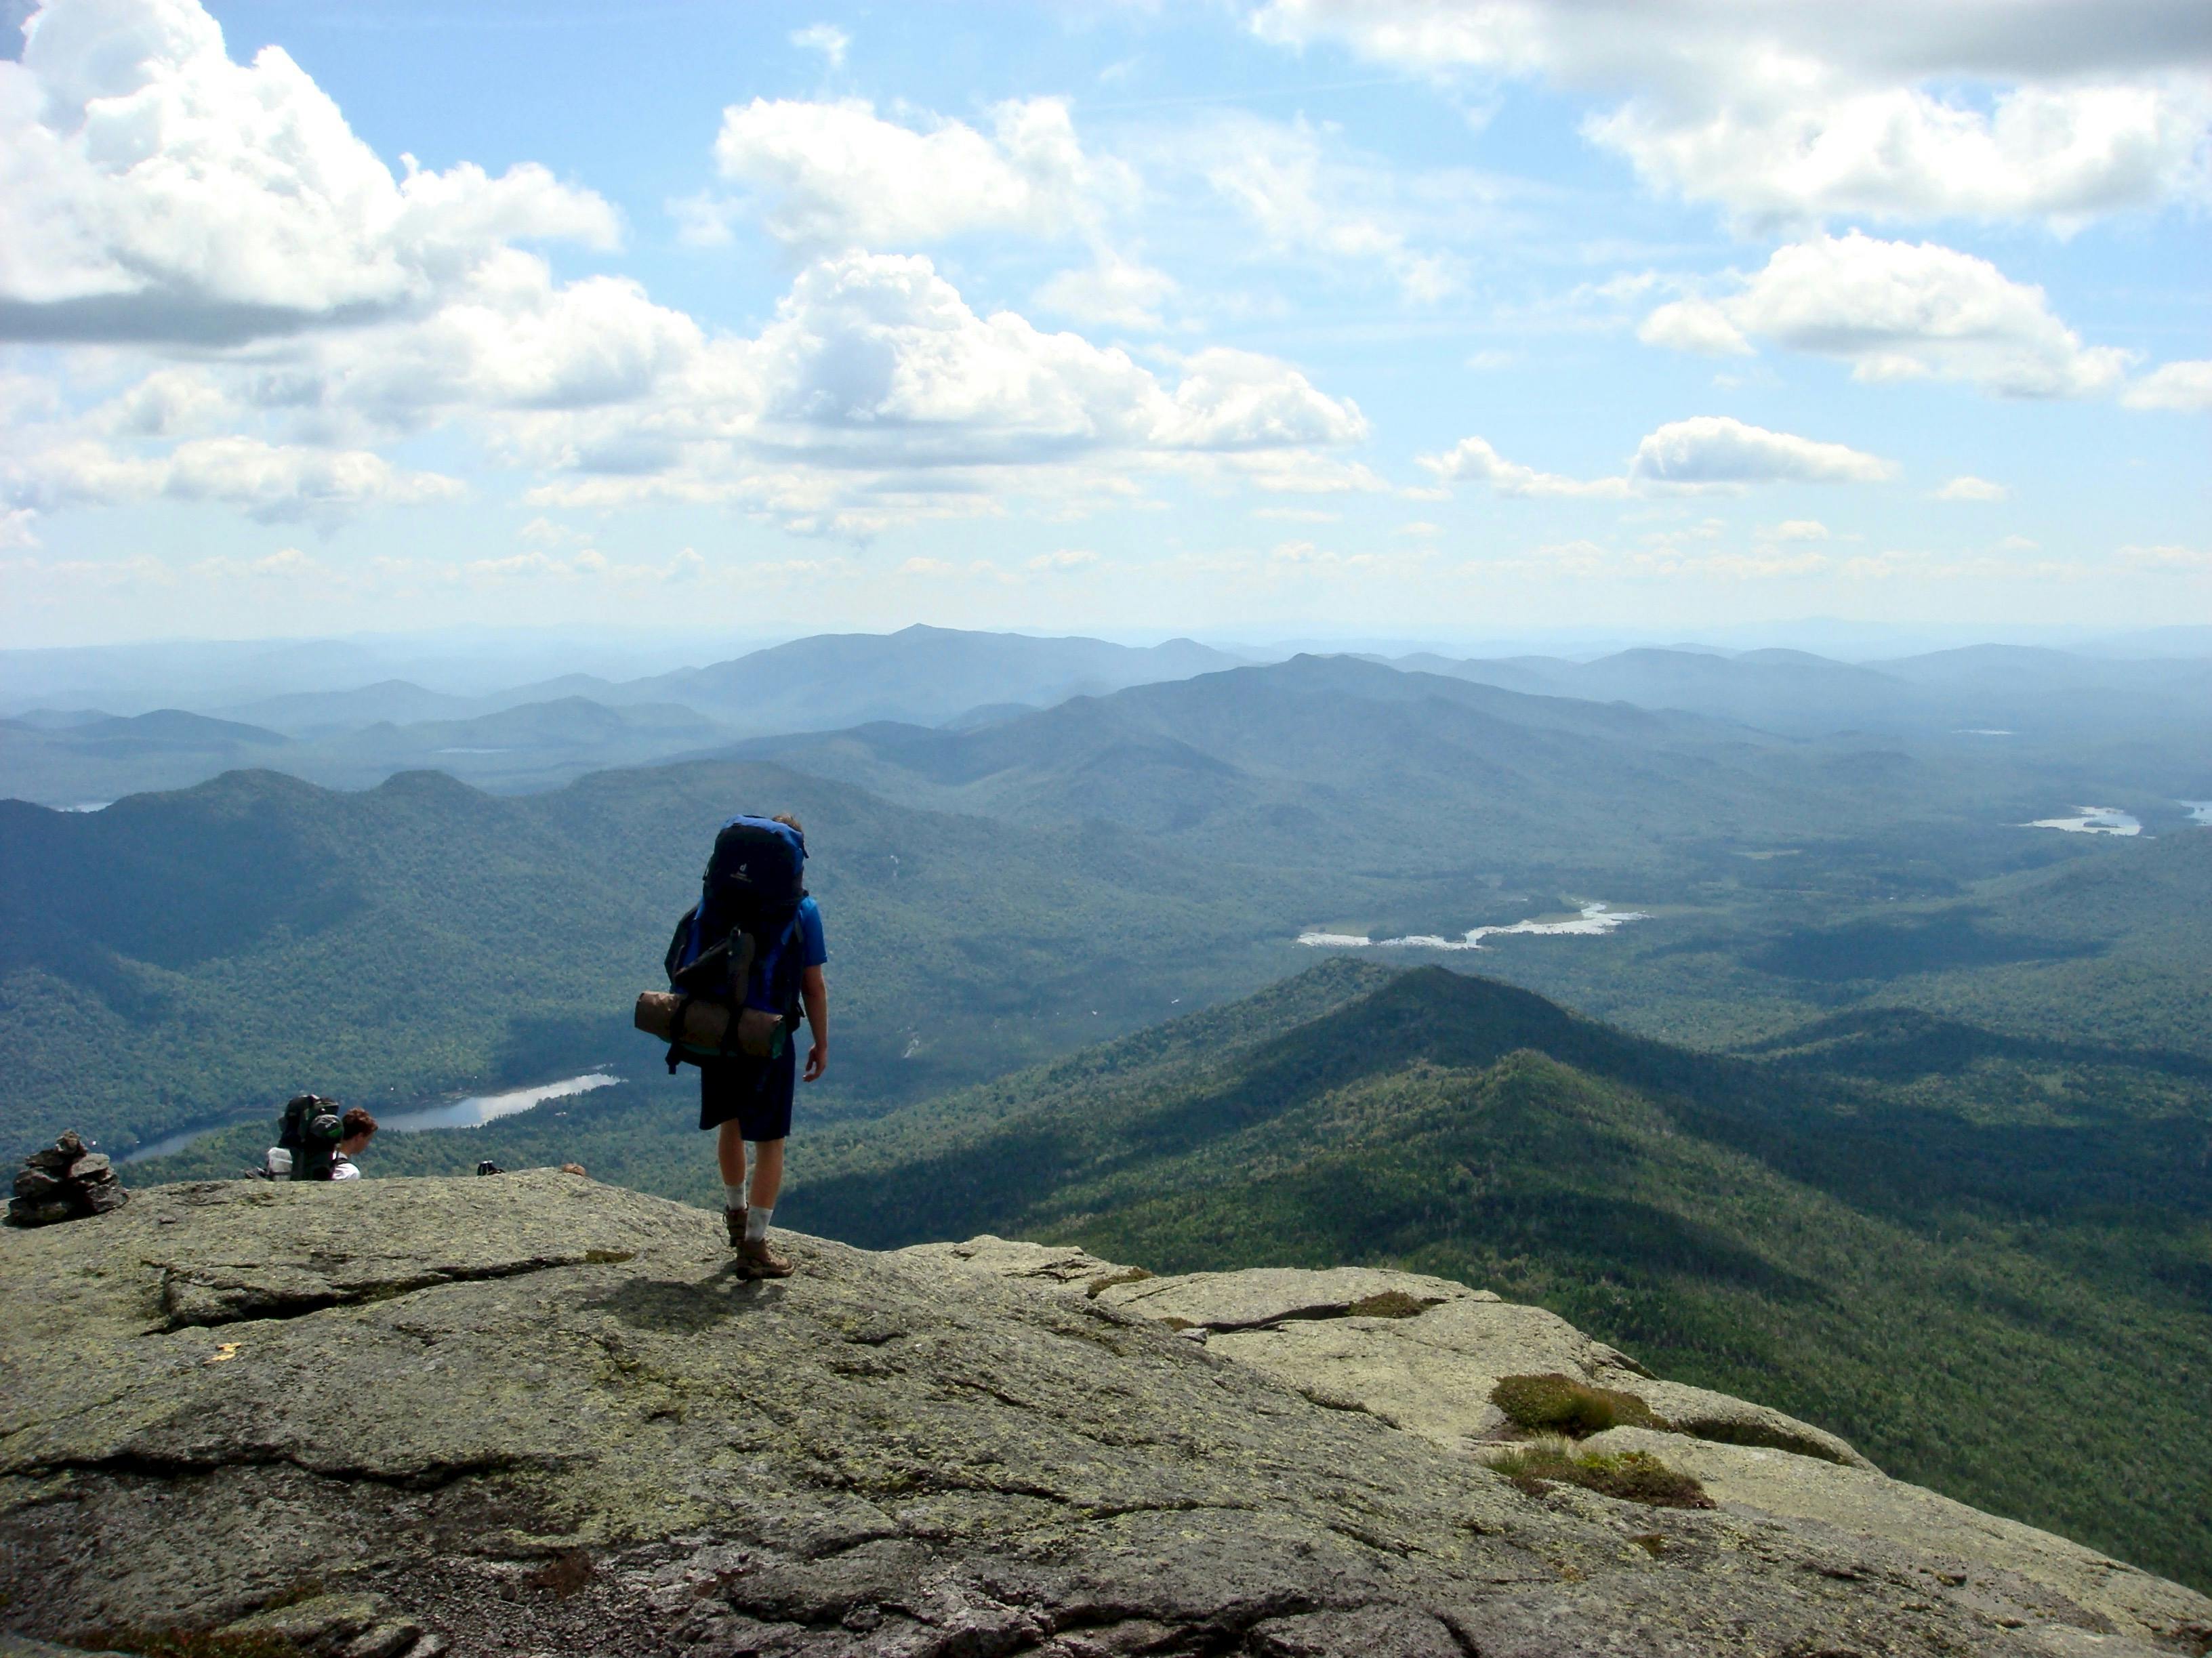 A person wearing a backpacking pack looks out at hills and mountains